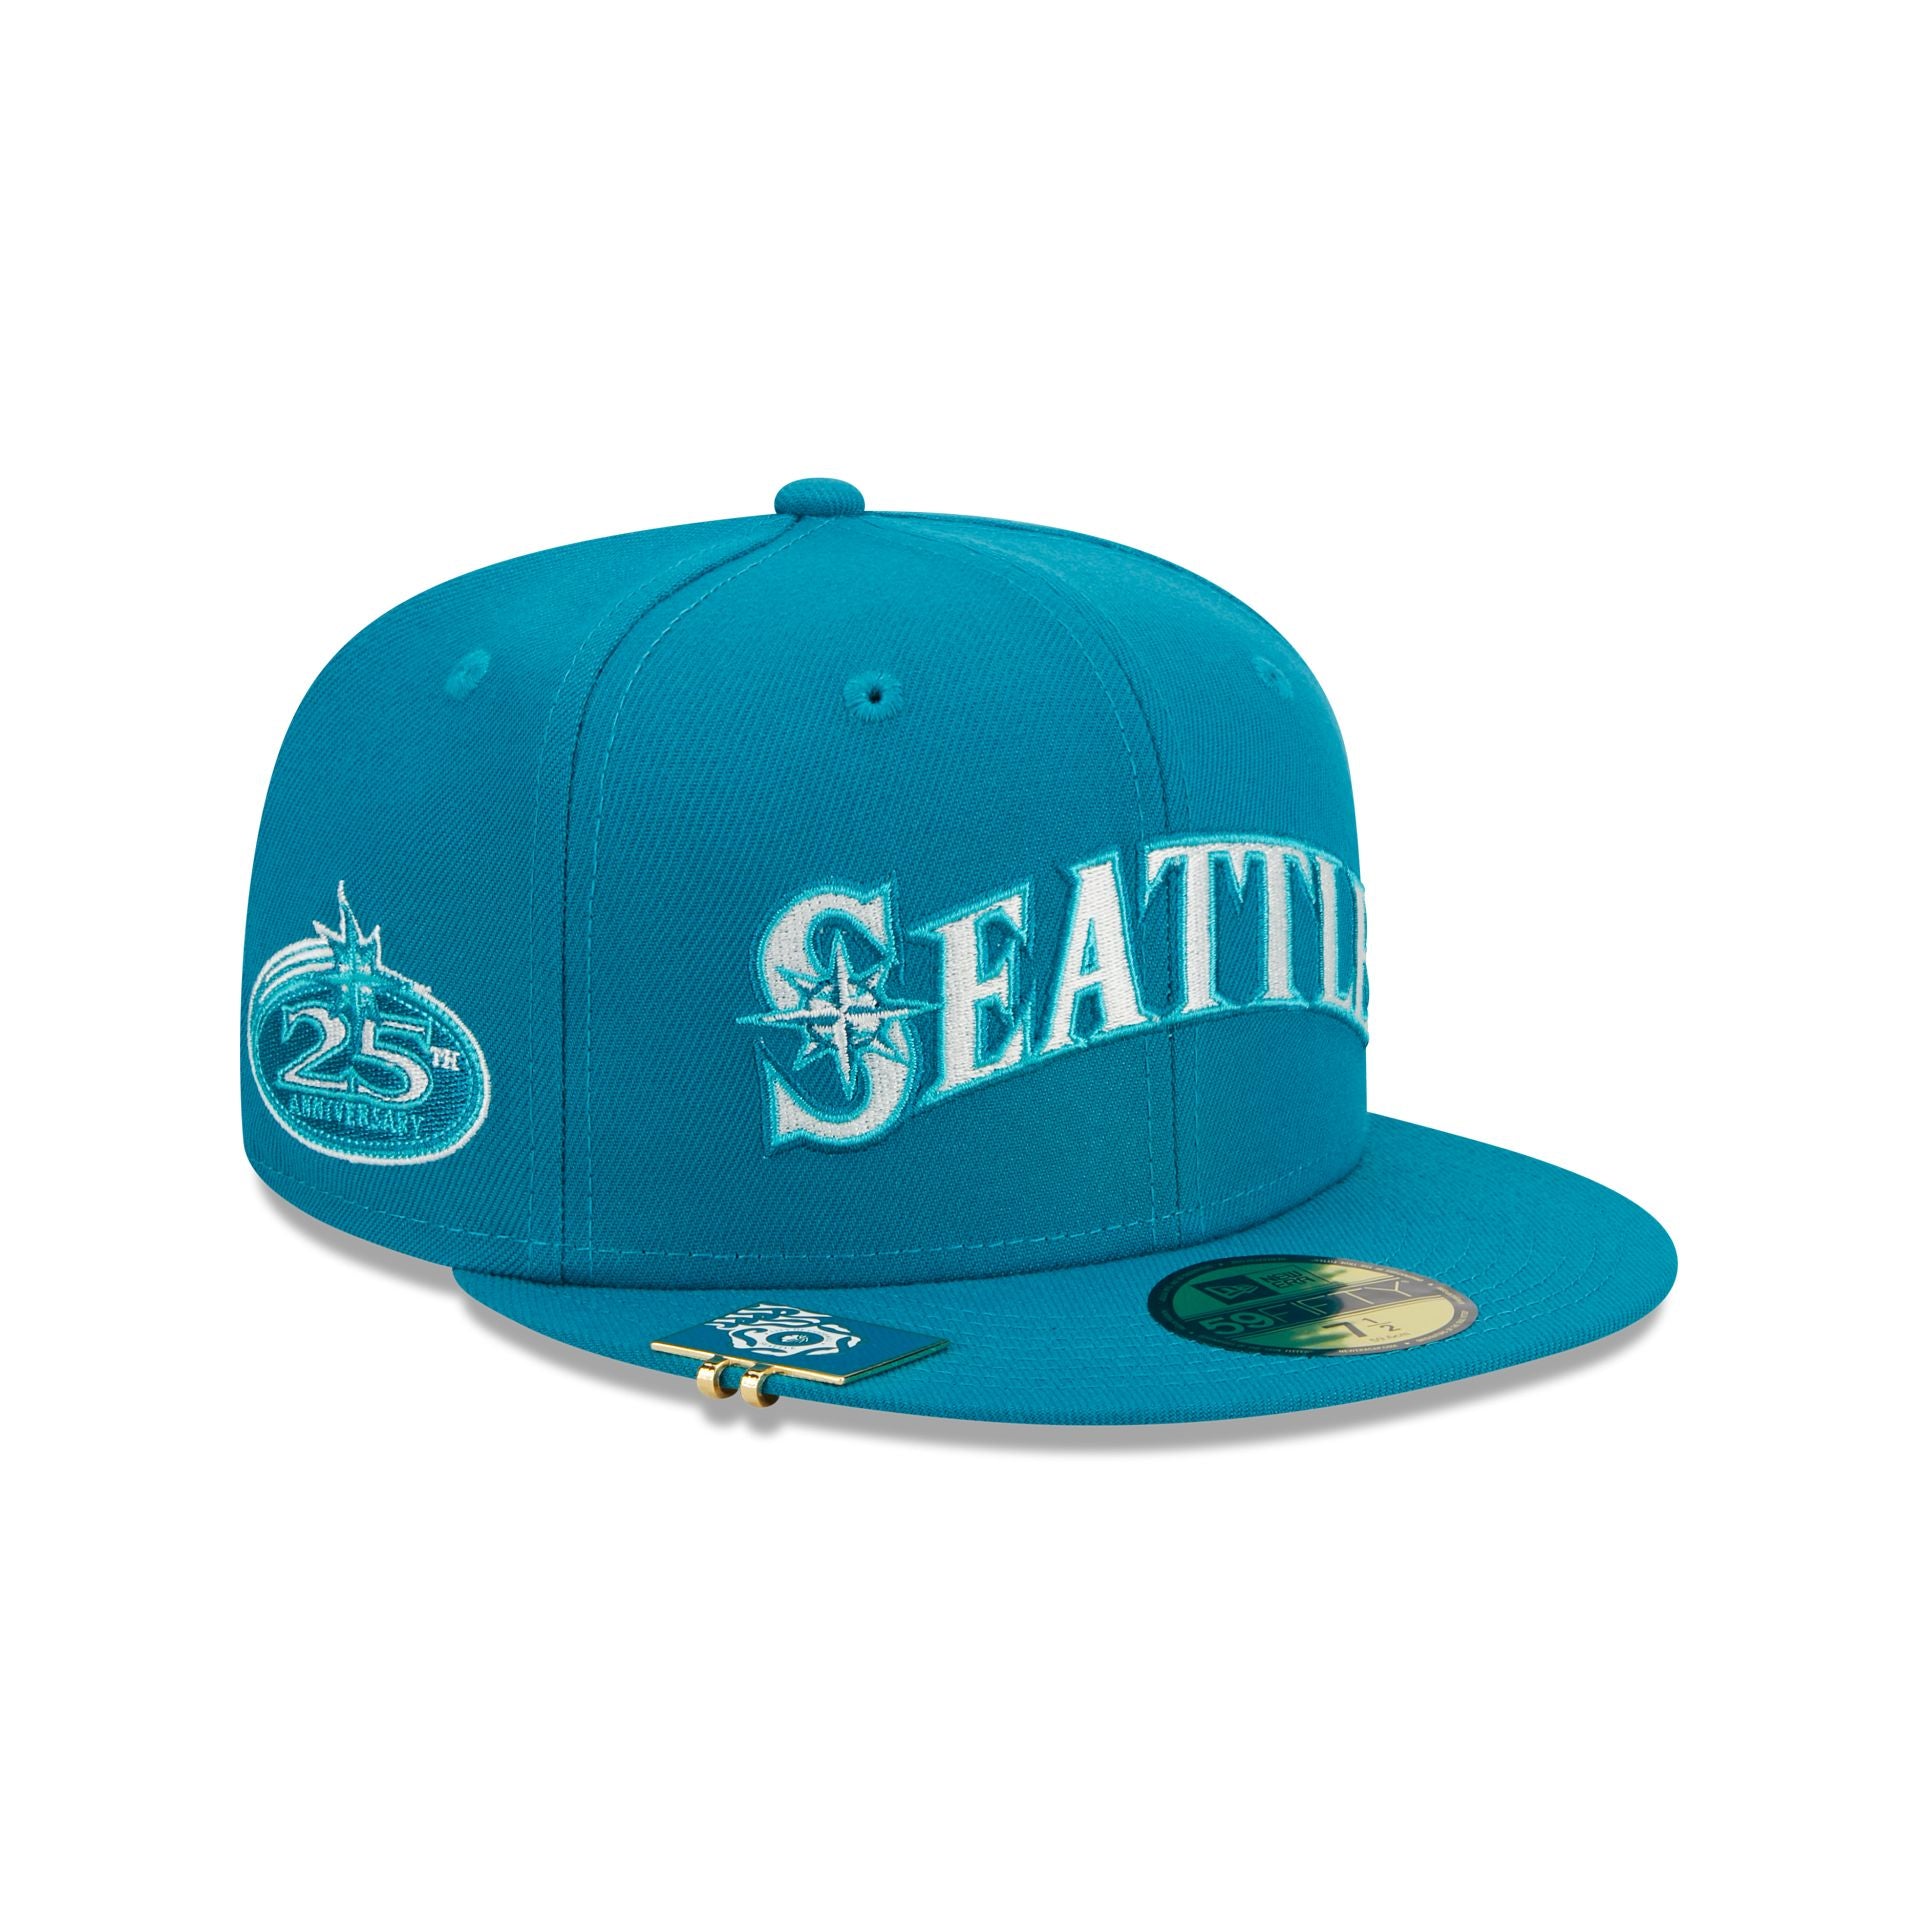 Men's Seattle Mariners New Era Gray/Teal 59FIFTY Fitted Hat